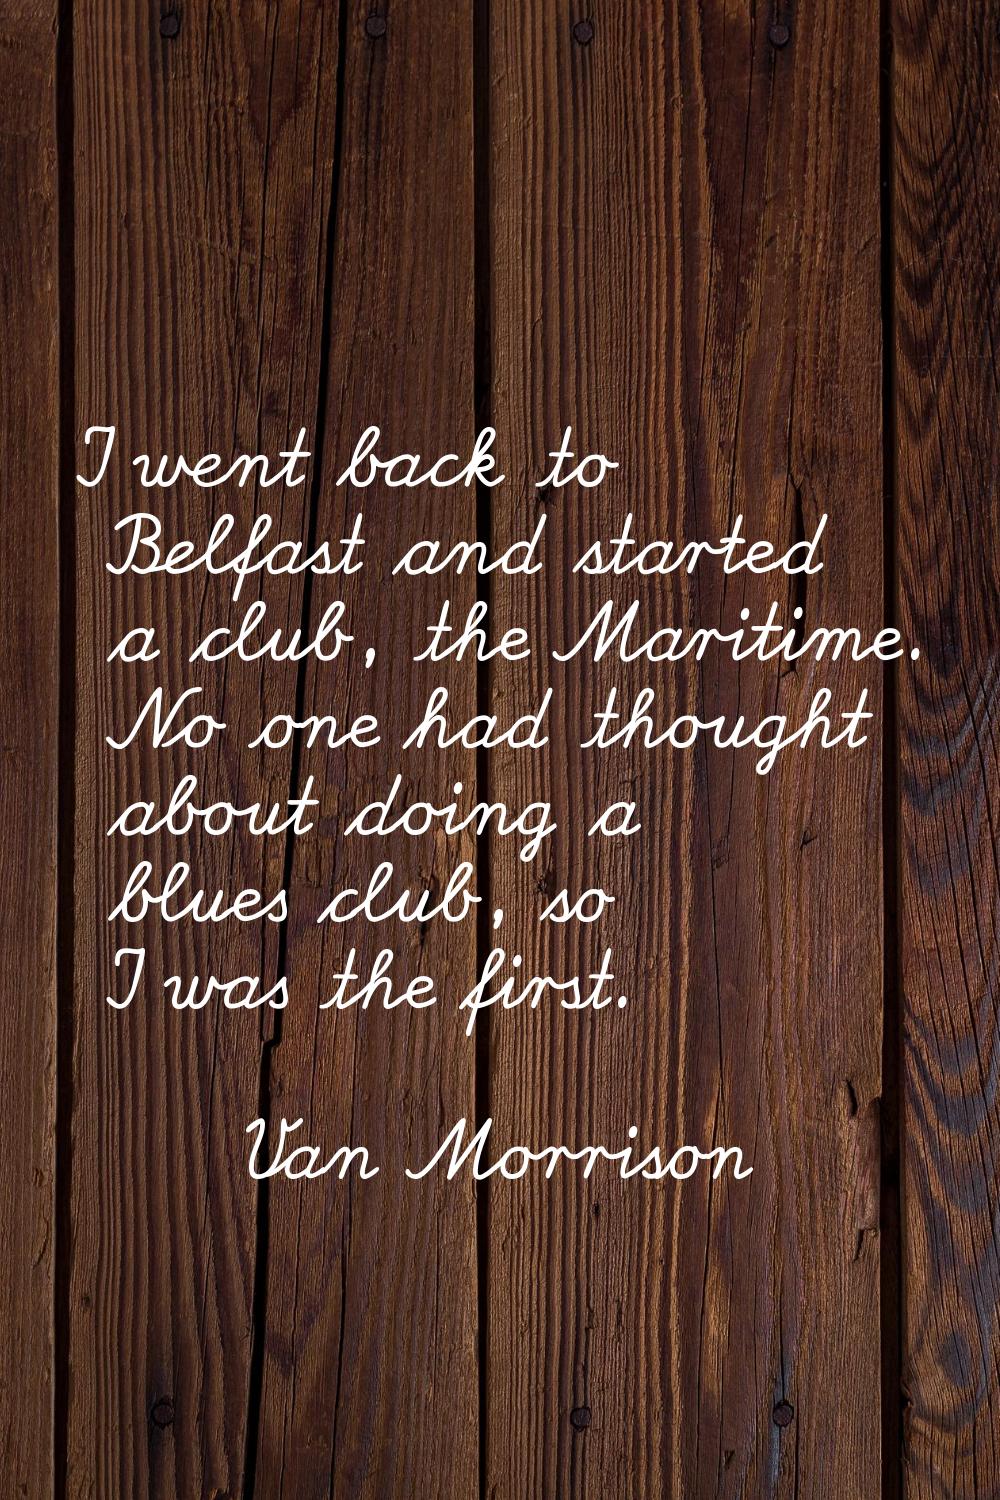 I went back to Belfast and started a club, the Maritime. No one had thought about doing a blues clu